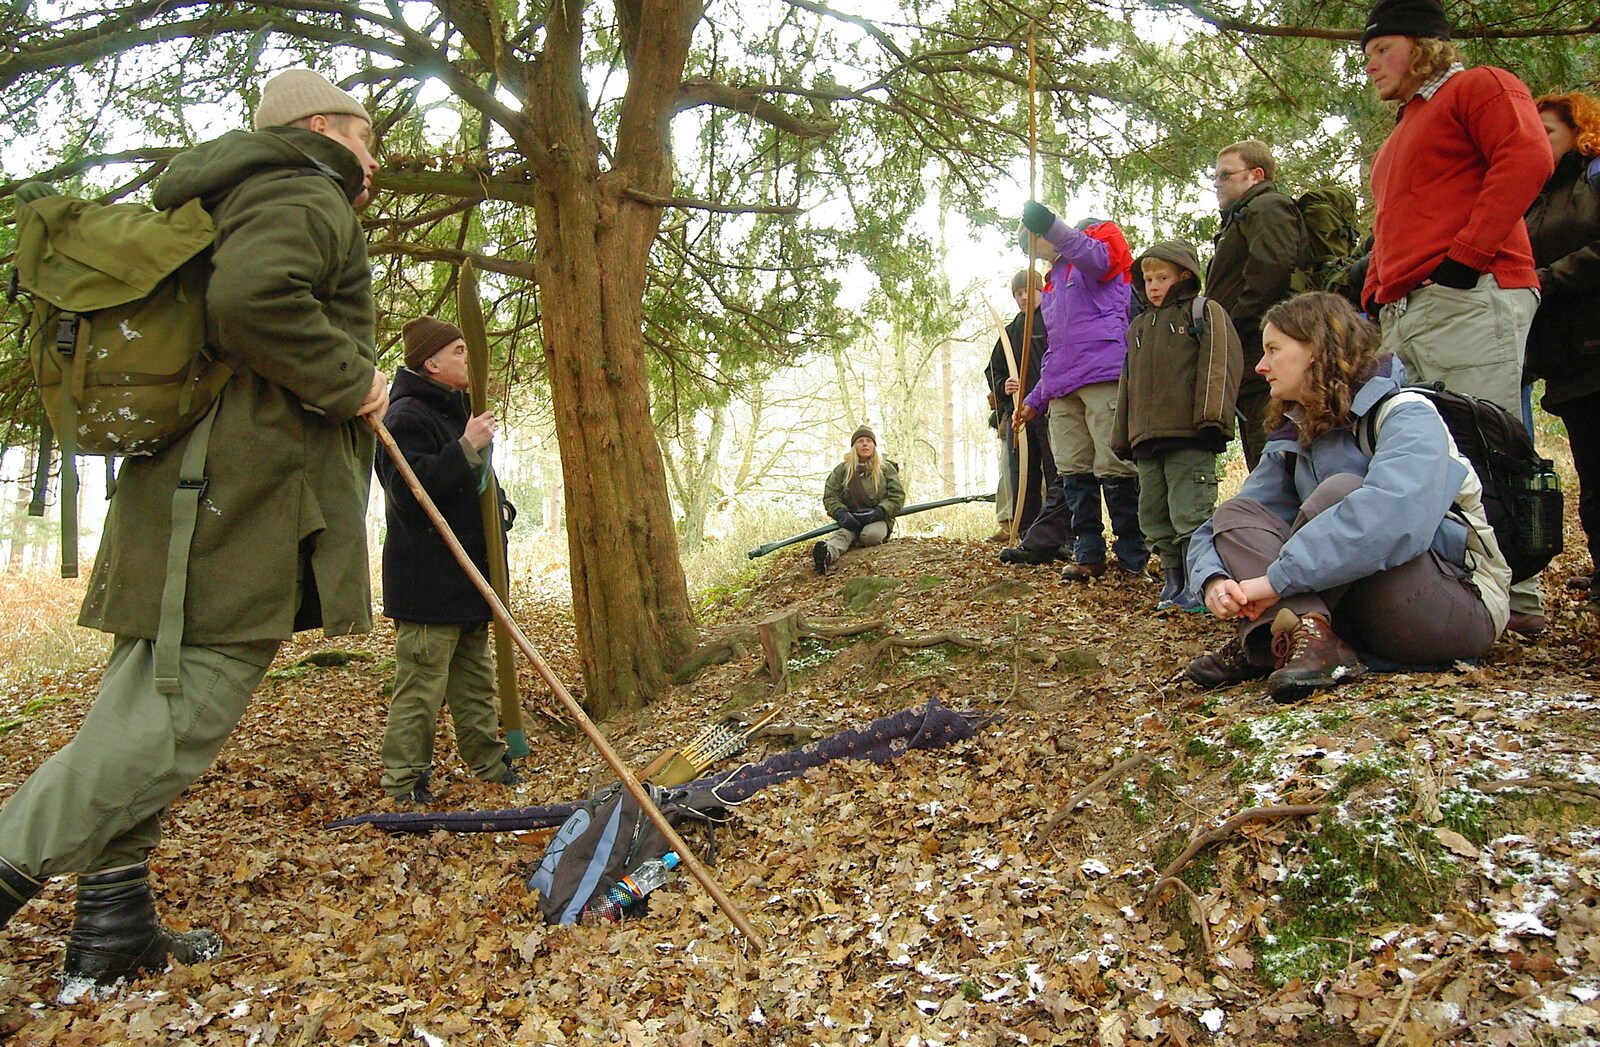 There's an introduction to archery from Walk Like a Shadow: A Day With Ray Mears, Ashdown Forest, East Sussex - 29th December 2005